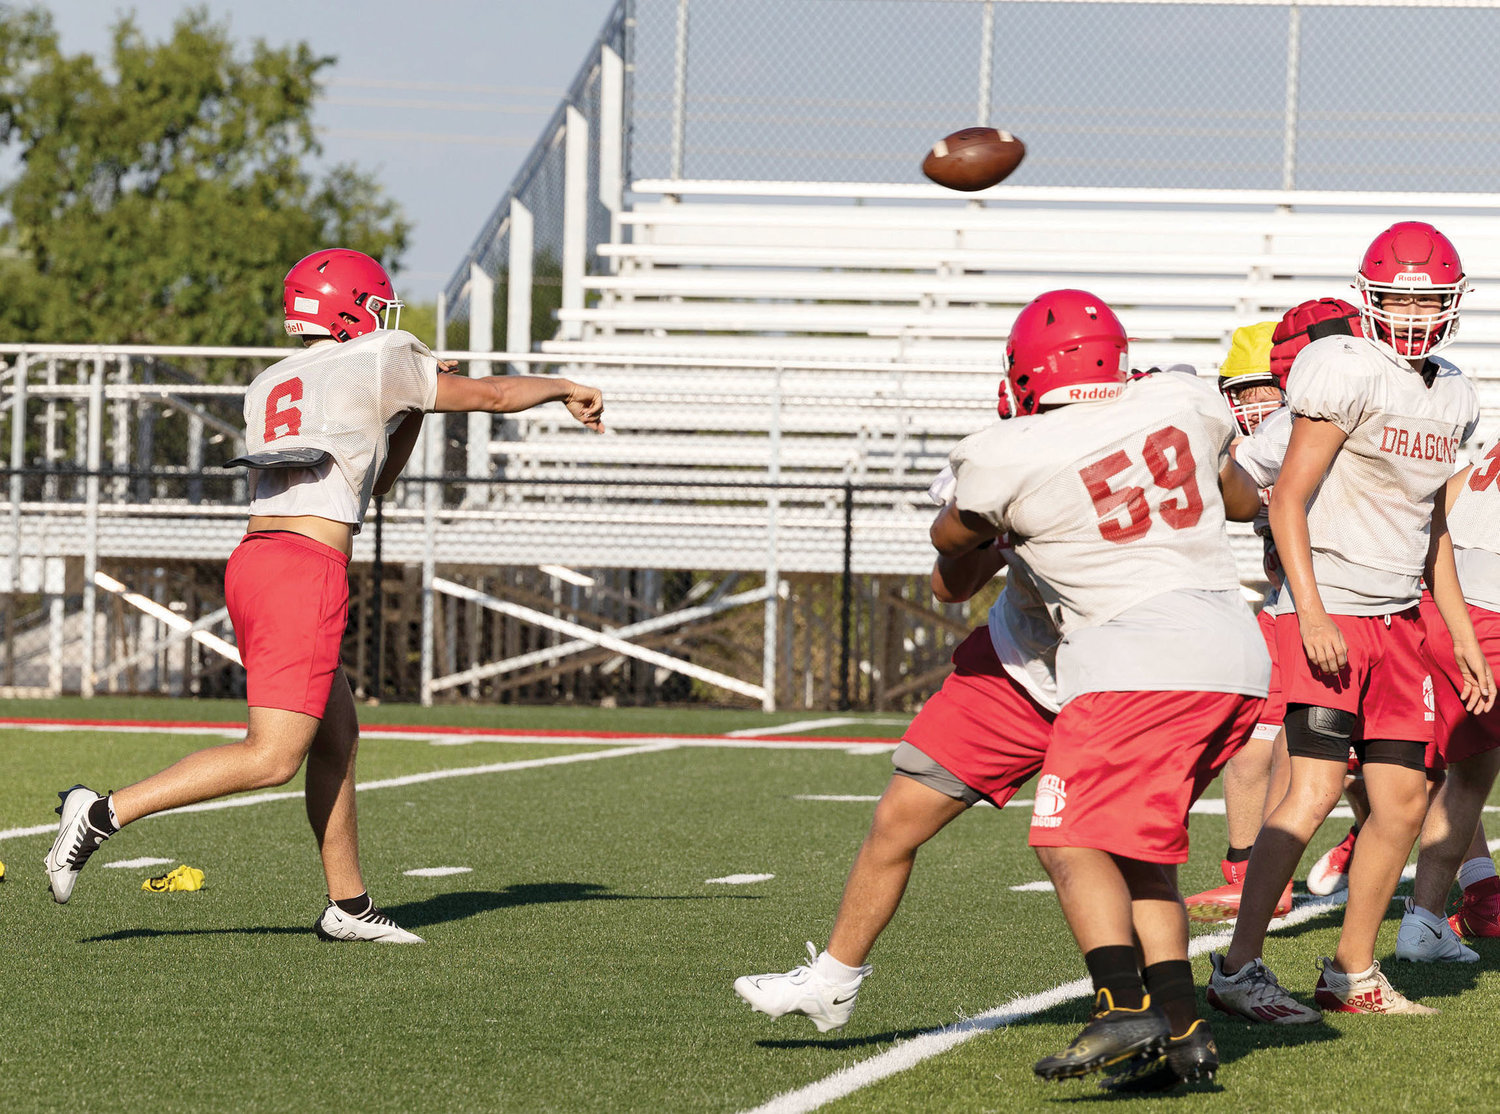 Purcell quarterback Brody Galyean throws a pass during the Dragons’ Red-White scrimmage Saturday.